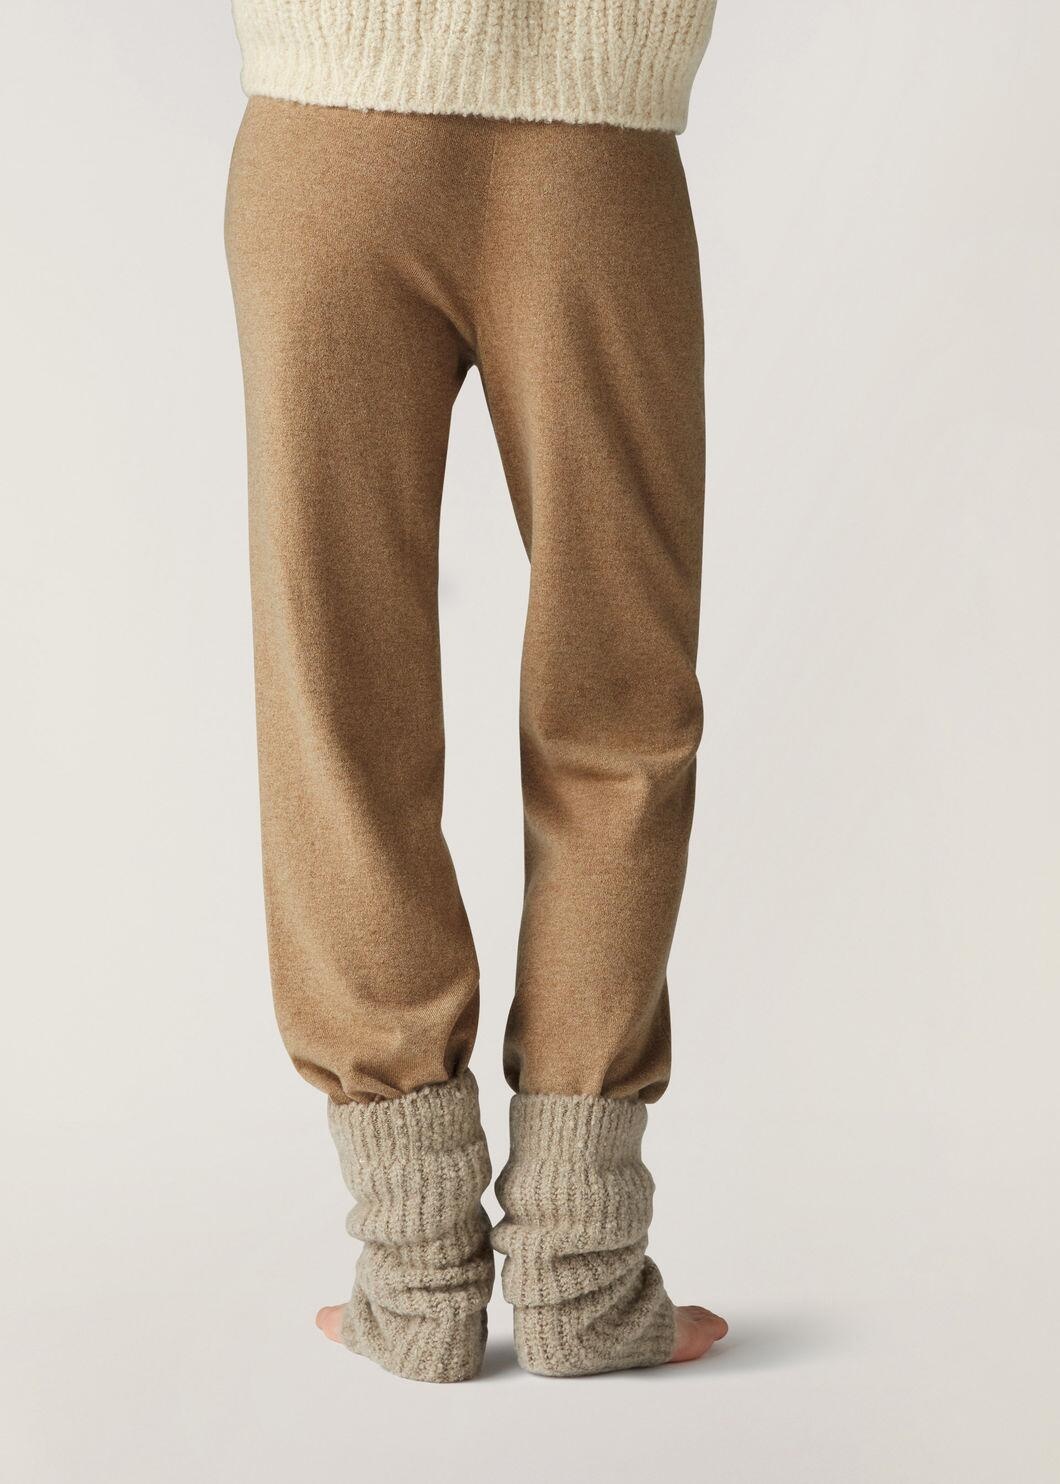 Cocooning Pants - 5